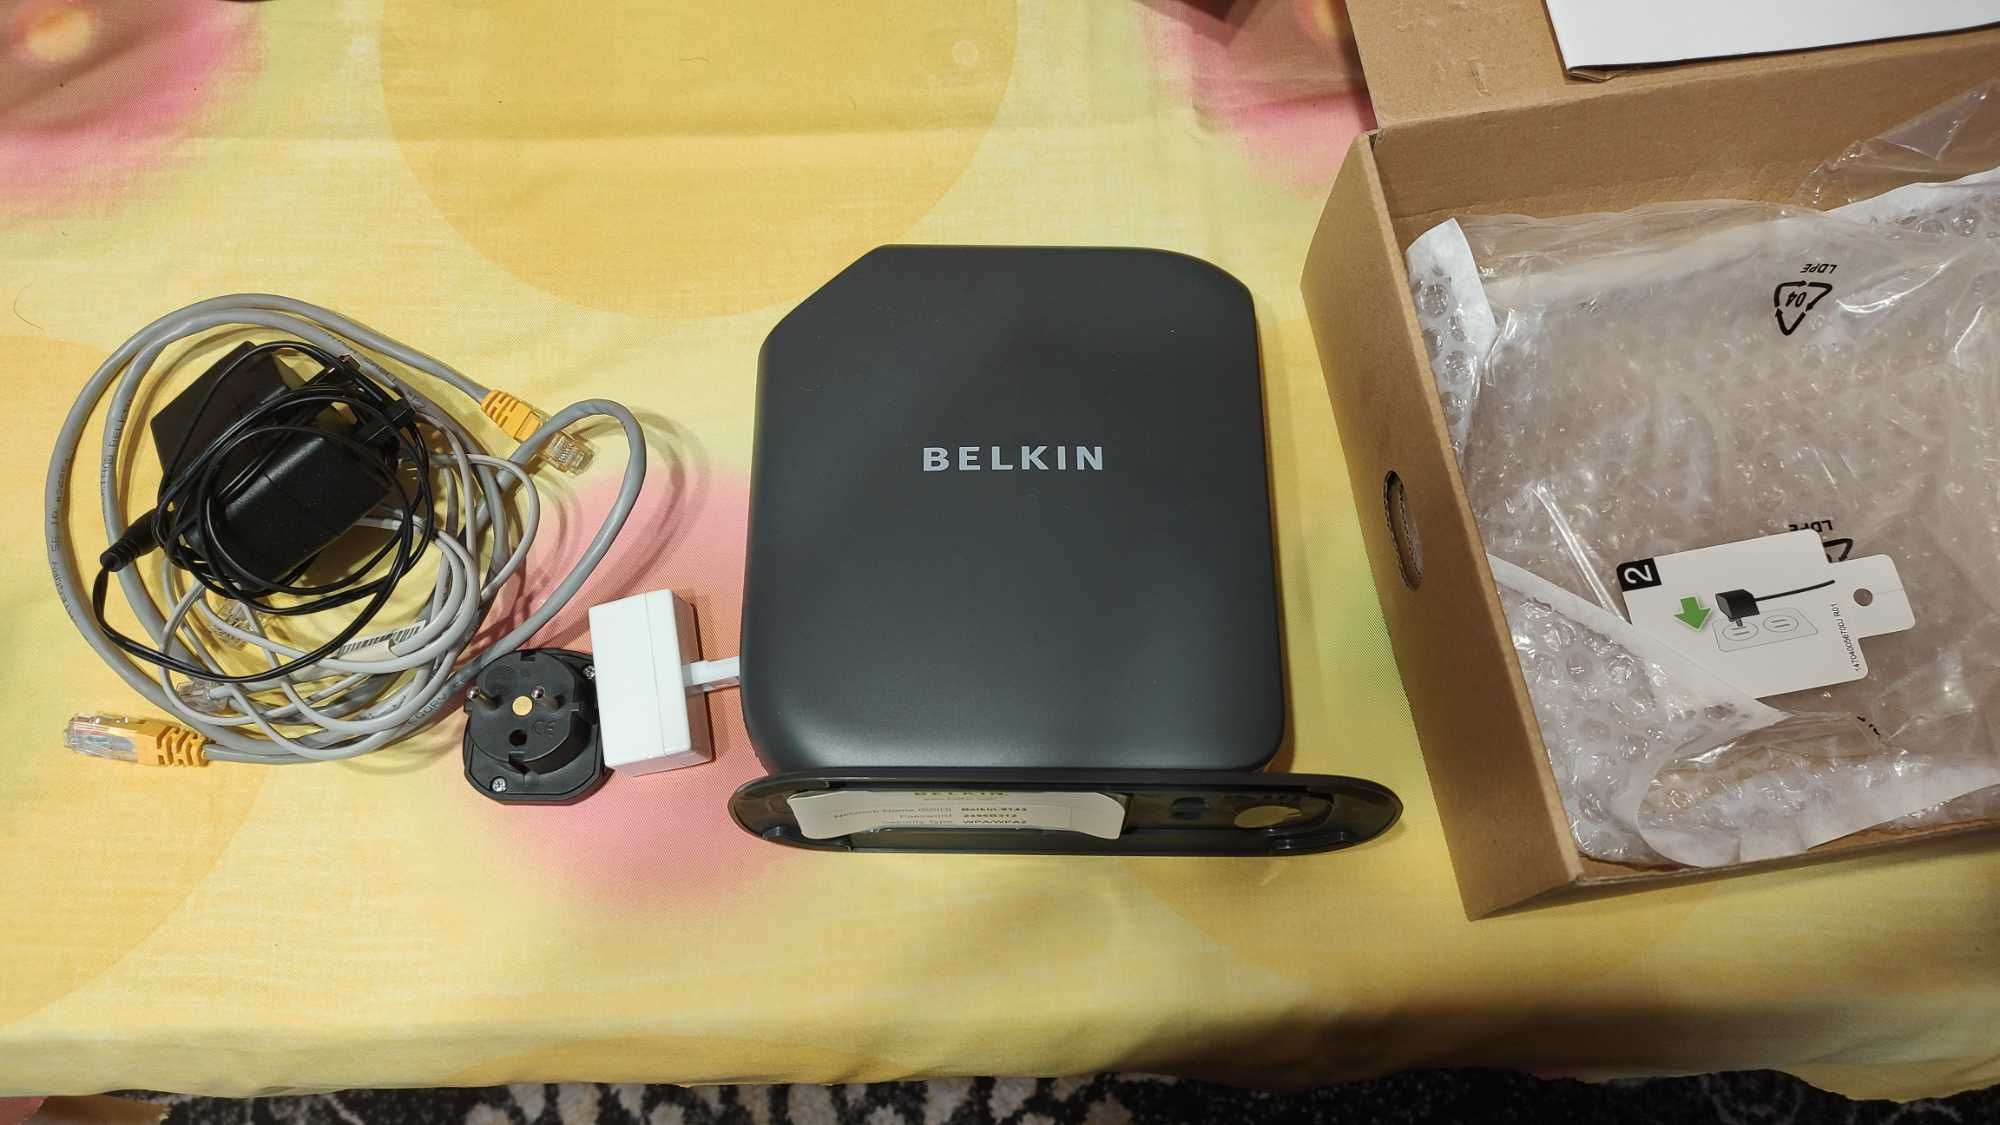 Router dualband belkin play max N600 HD